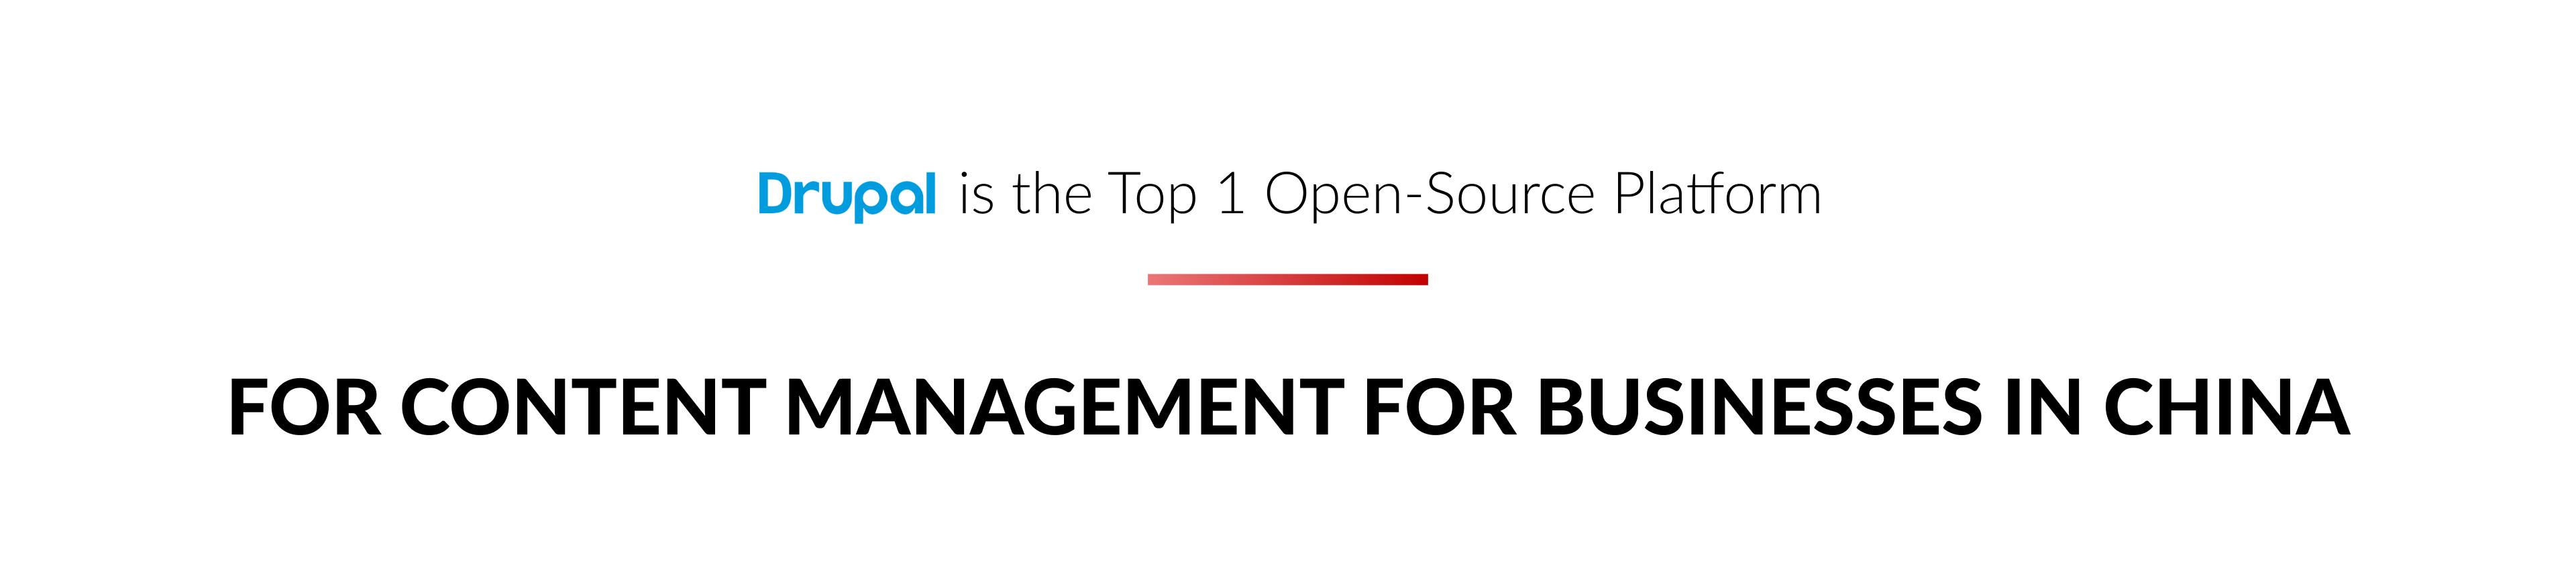 Drupal is the Top 1 Open-Source platform for content management for businesses in China